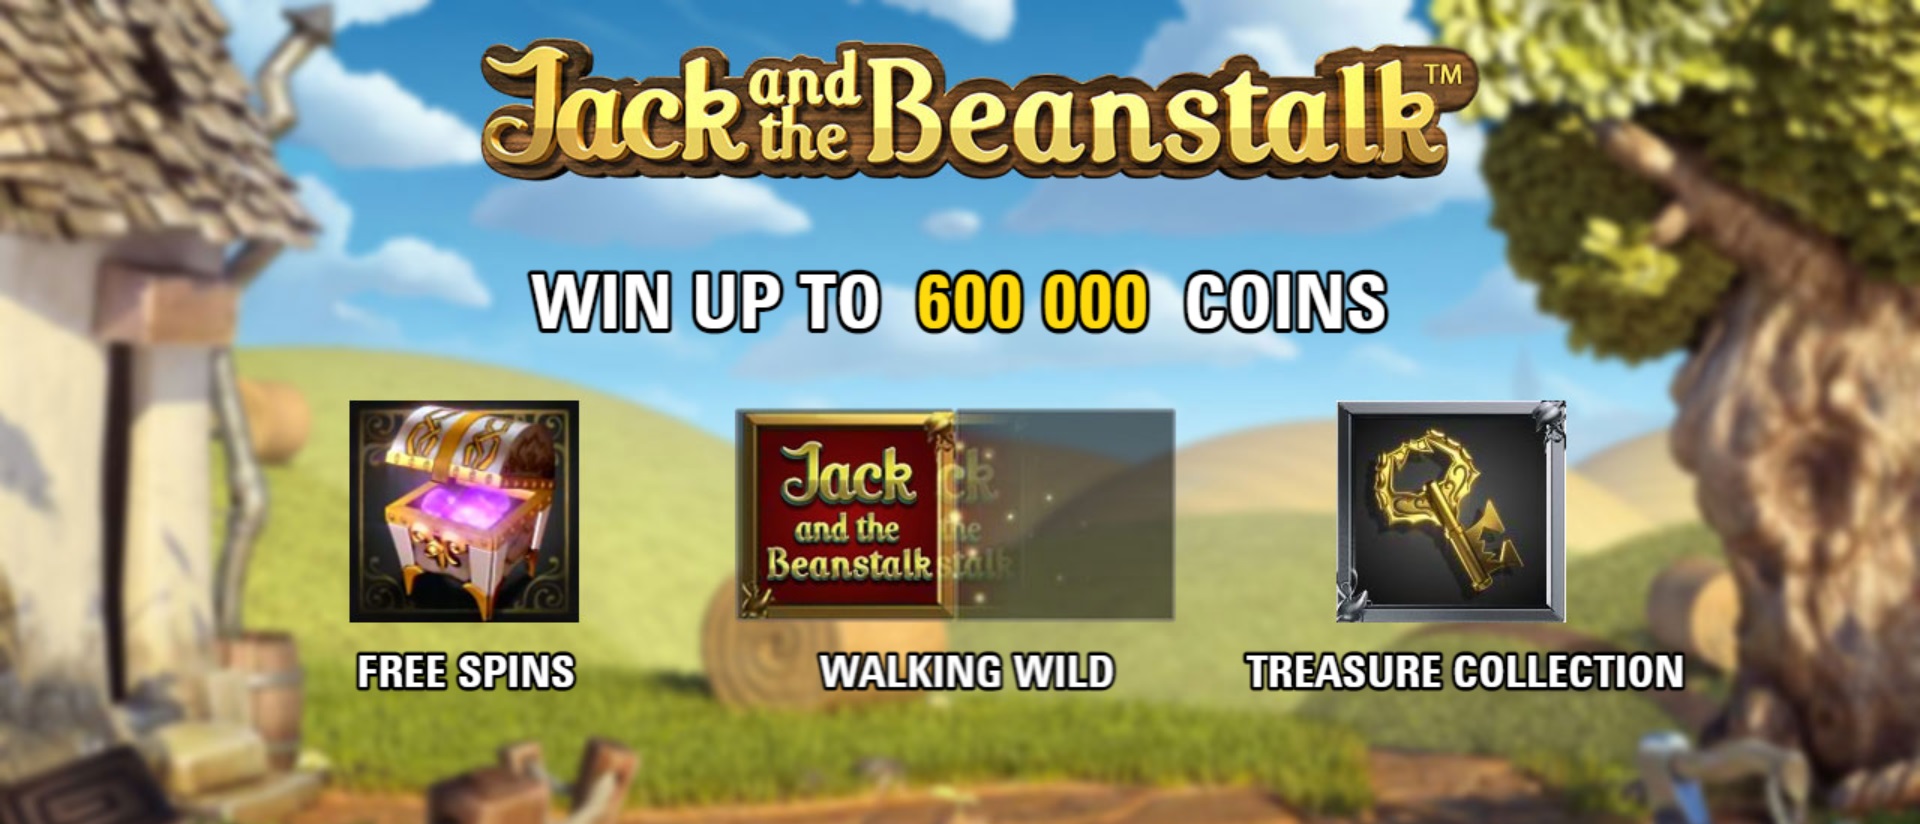 Jack and the Beanstalk Slot Machines